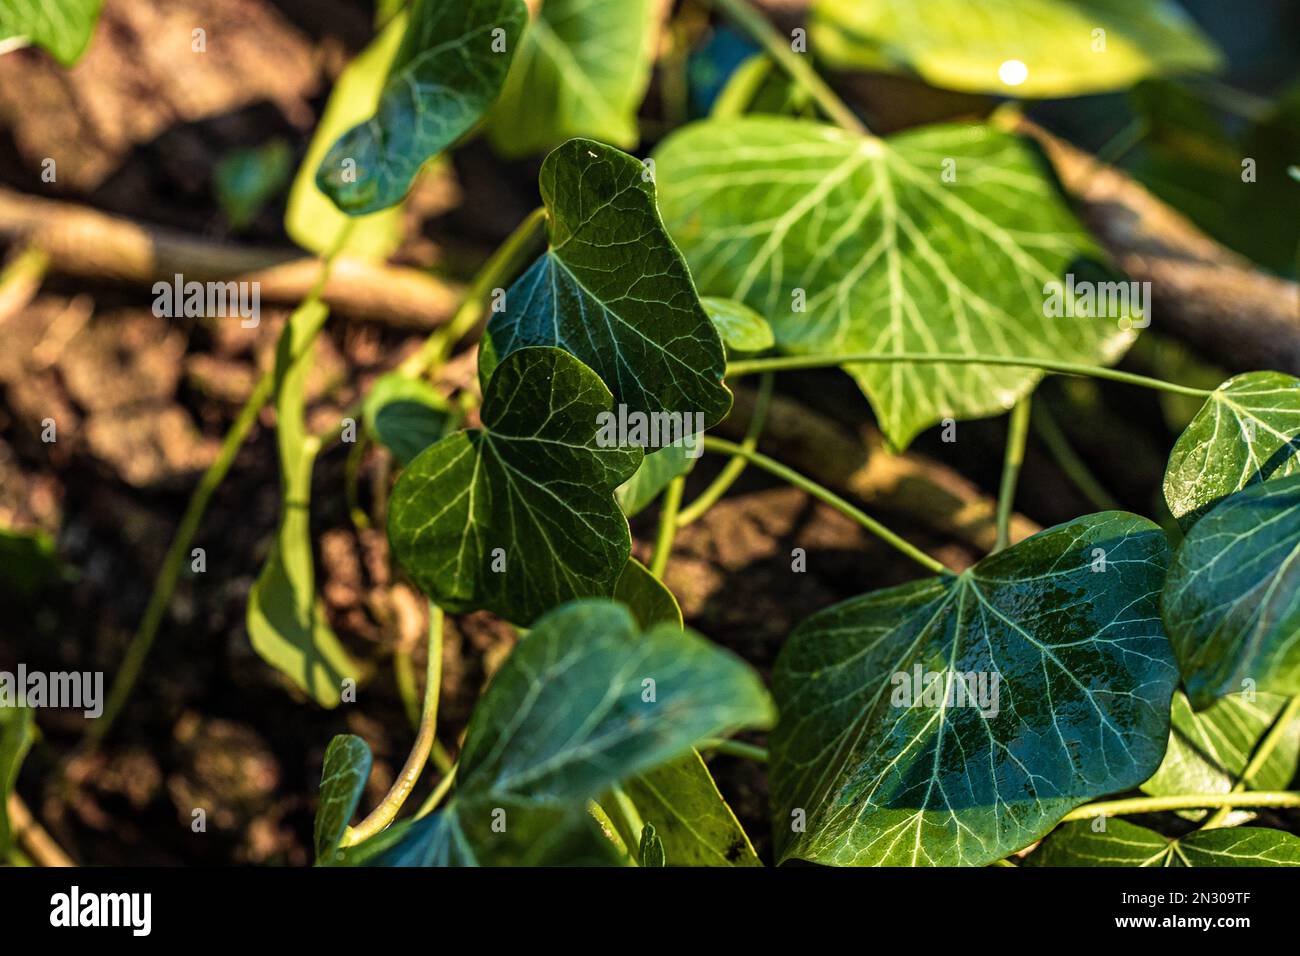 Fresh green english ivy vine leaves on branch up close Stock Photo